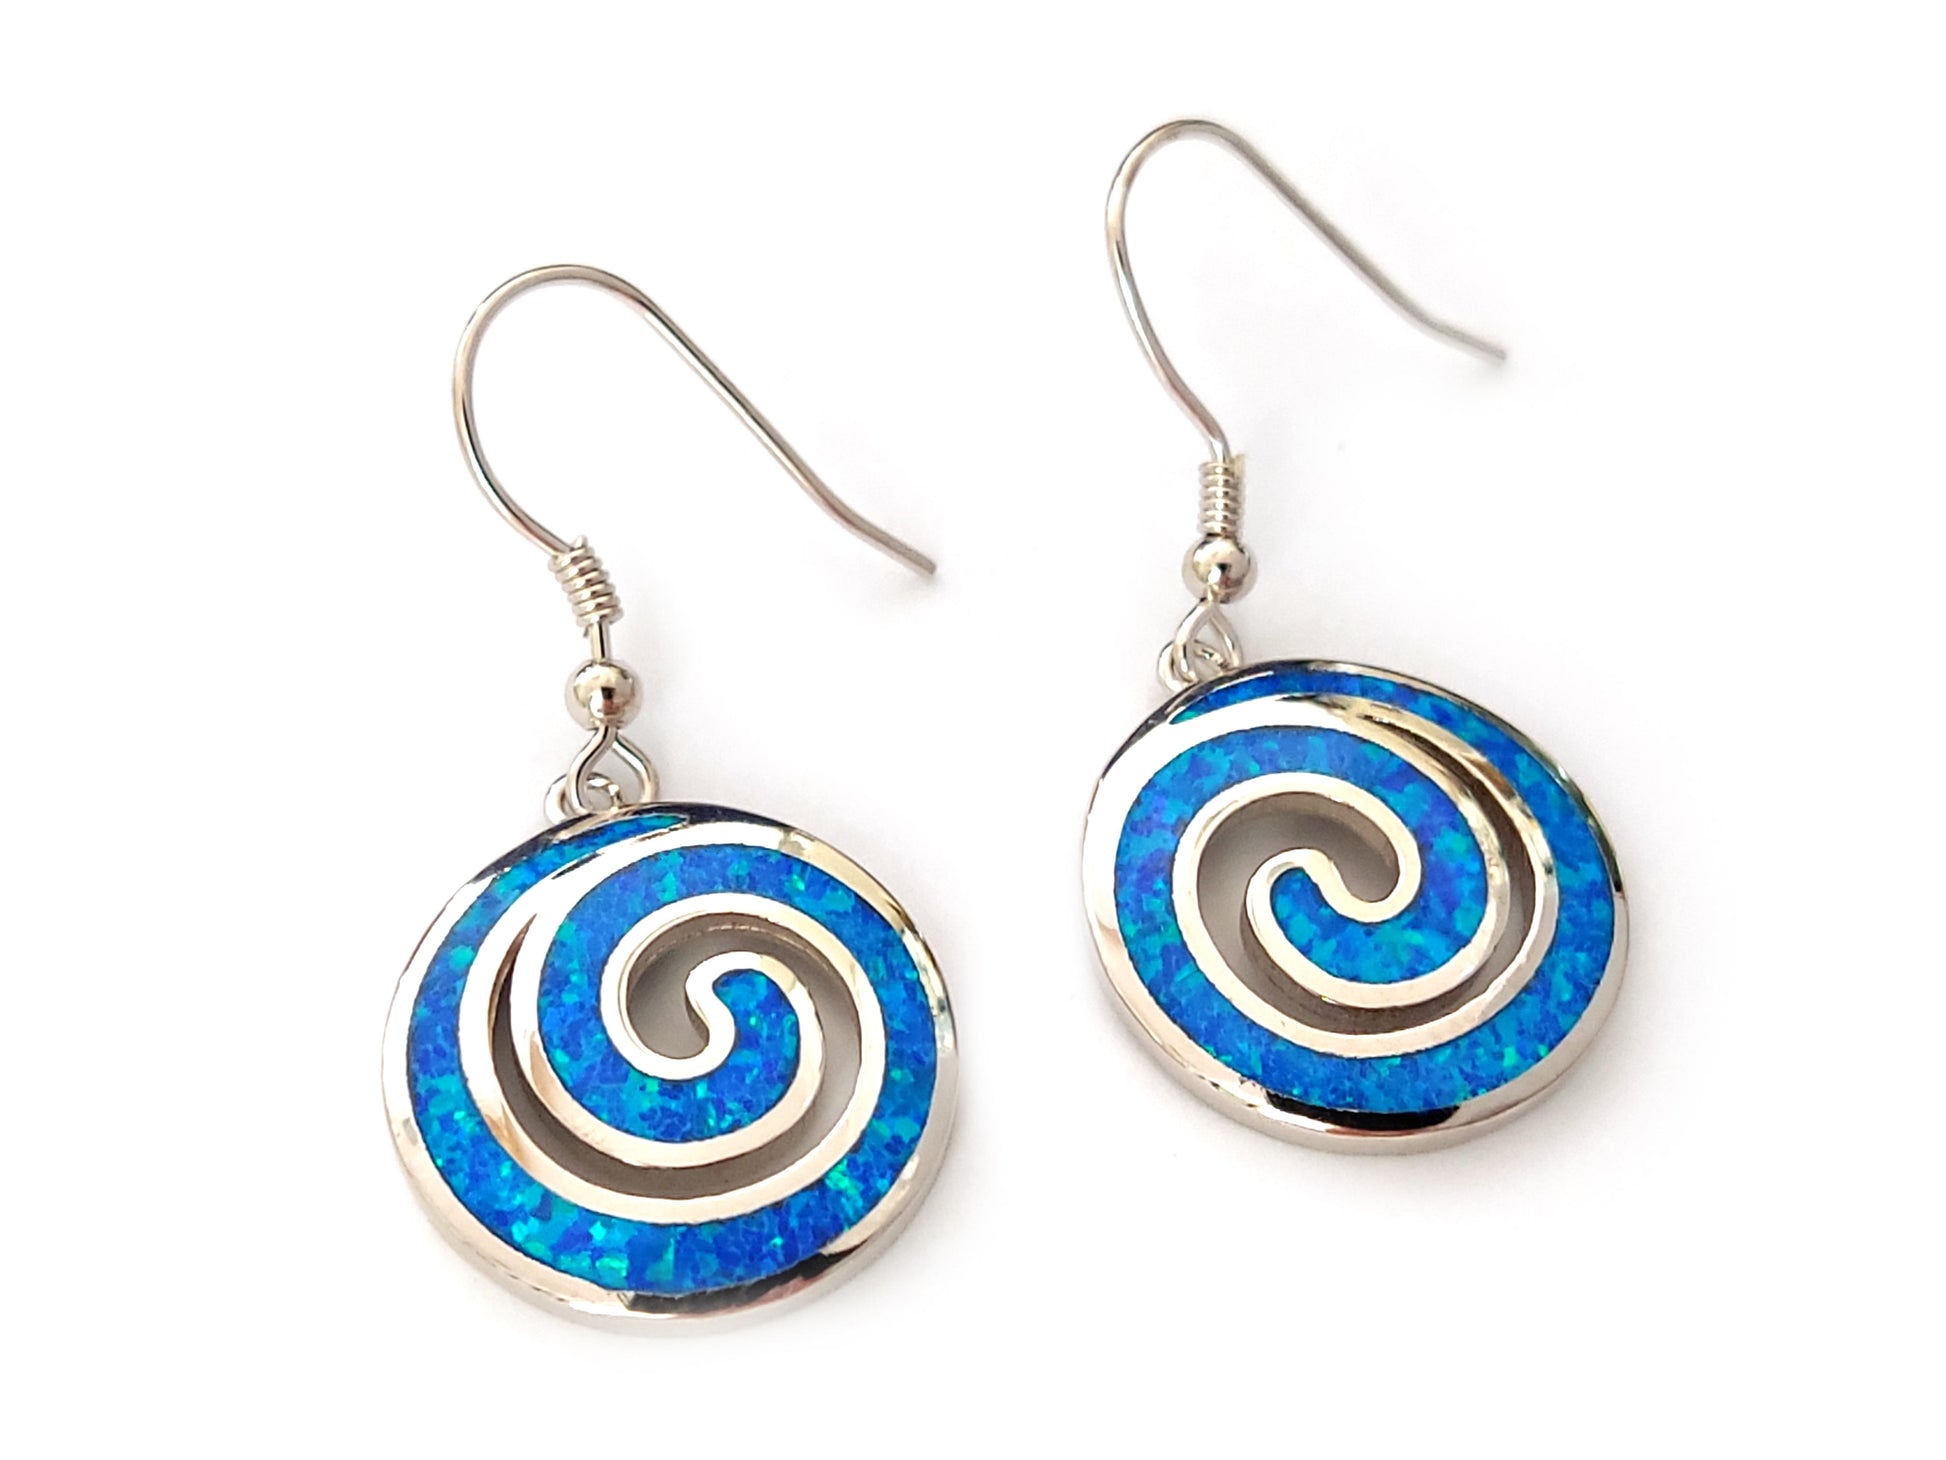 Greek silver earrings with spiral design and blue opal stones measuring 18mm diameter on white background.